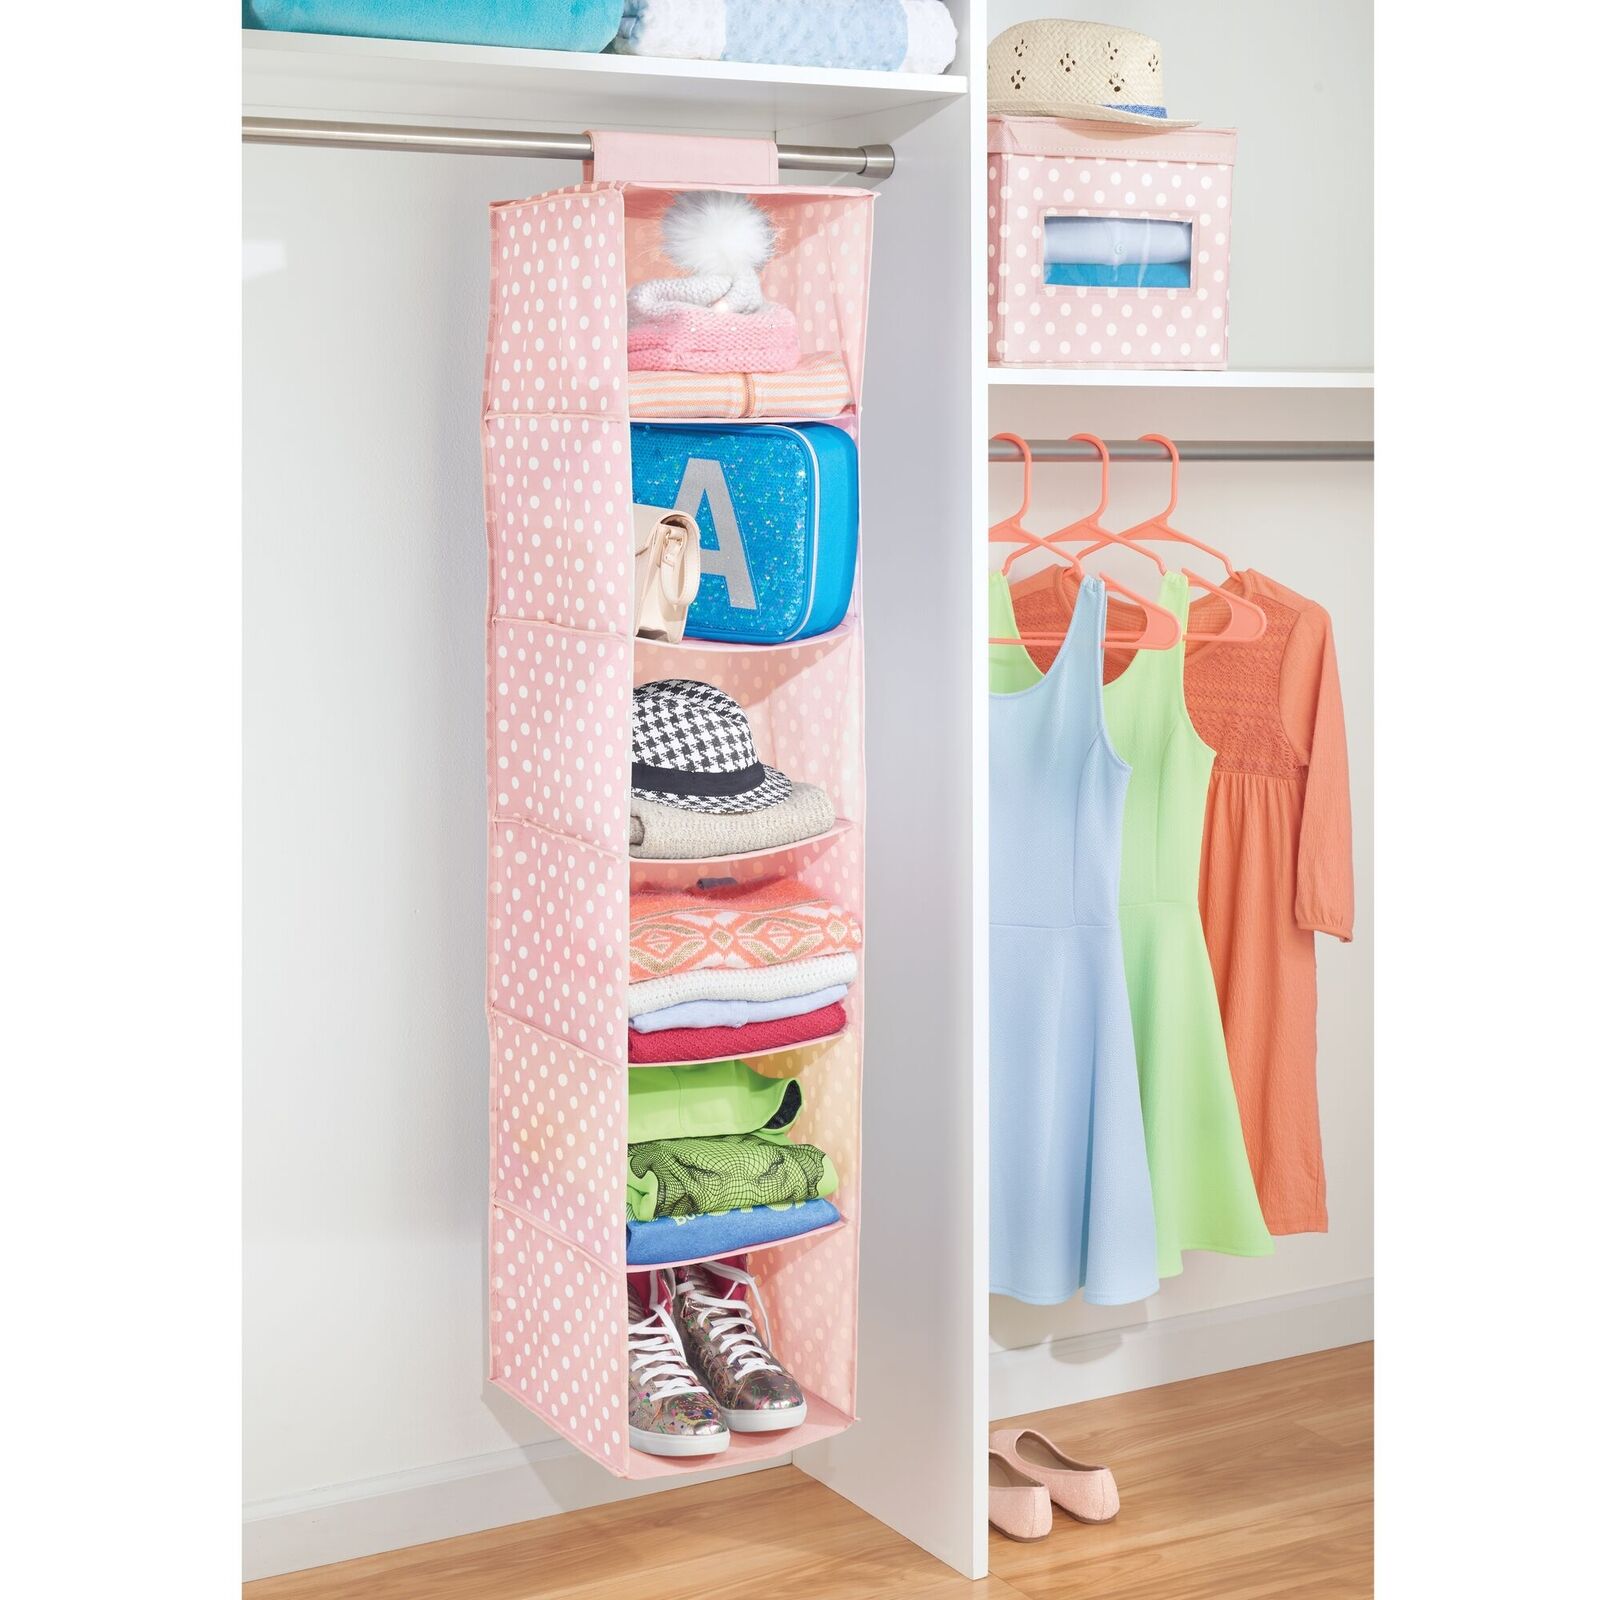 BlushBees® Long Soft Fabric Over Closet Rod Hanging Storage Organizer with 6 Shelves for Clothes, Leggings, Lingerie, T Shirts